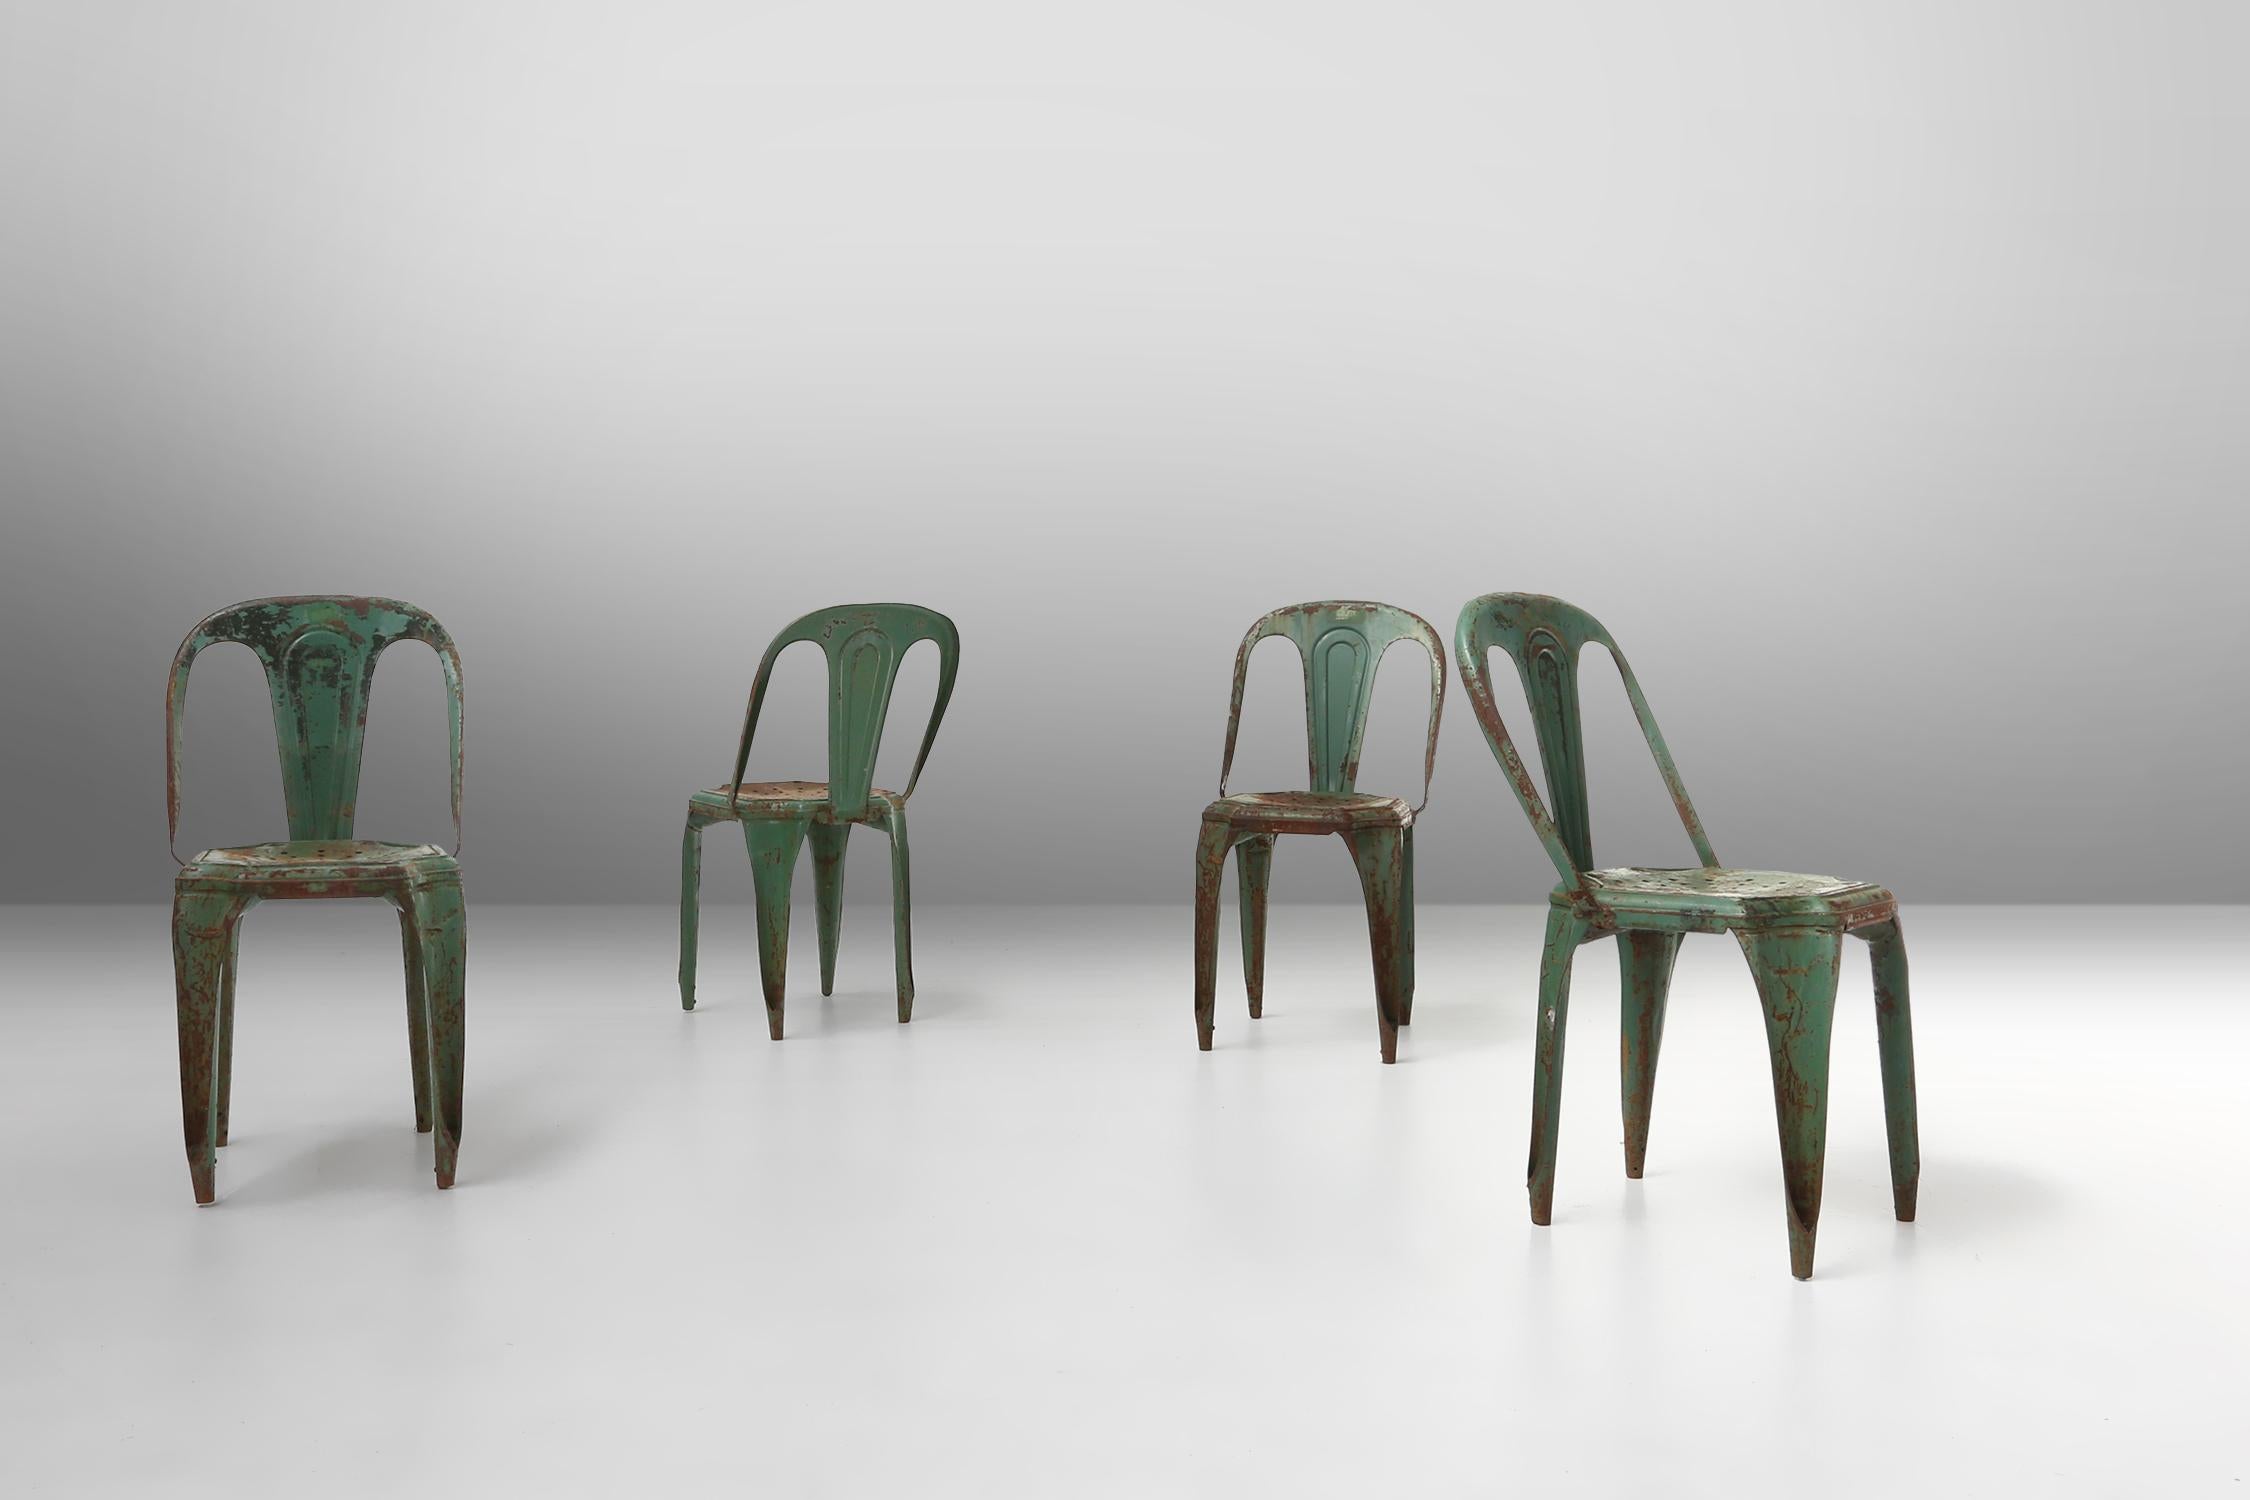 France / 1950 / set of 4 chairs / Tolix / model A / metal / industrial / mid-century / vintage

Set of 4 vintage Tolix chairs with original green lacquer, made in France around 1950. Created in 1927 by Xavier Pauchard. This set of iconic stackable